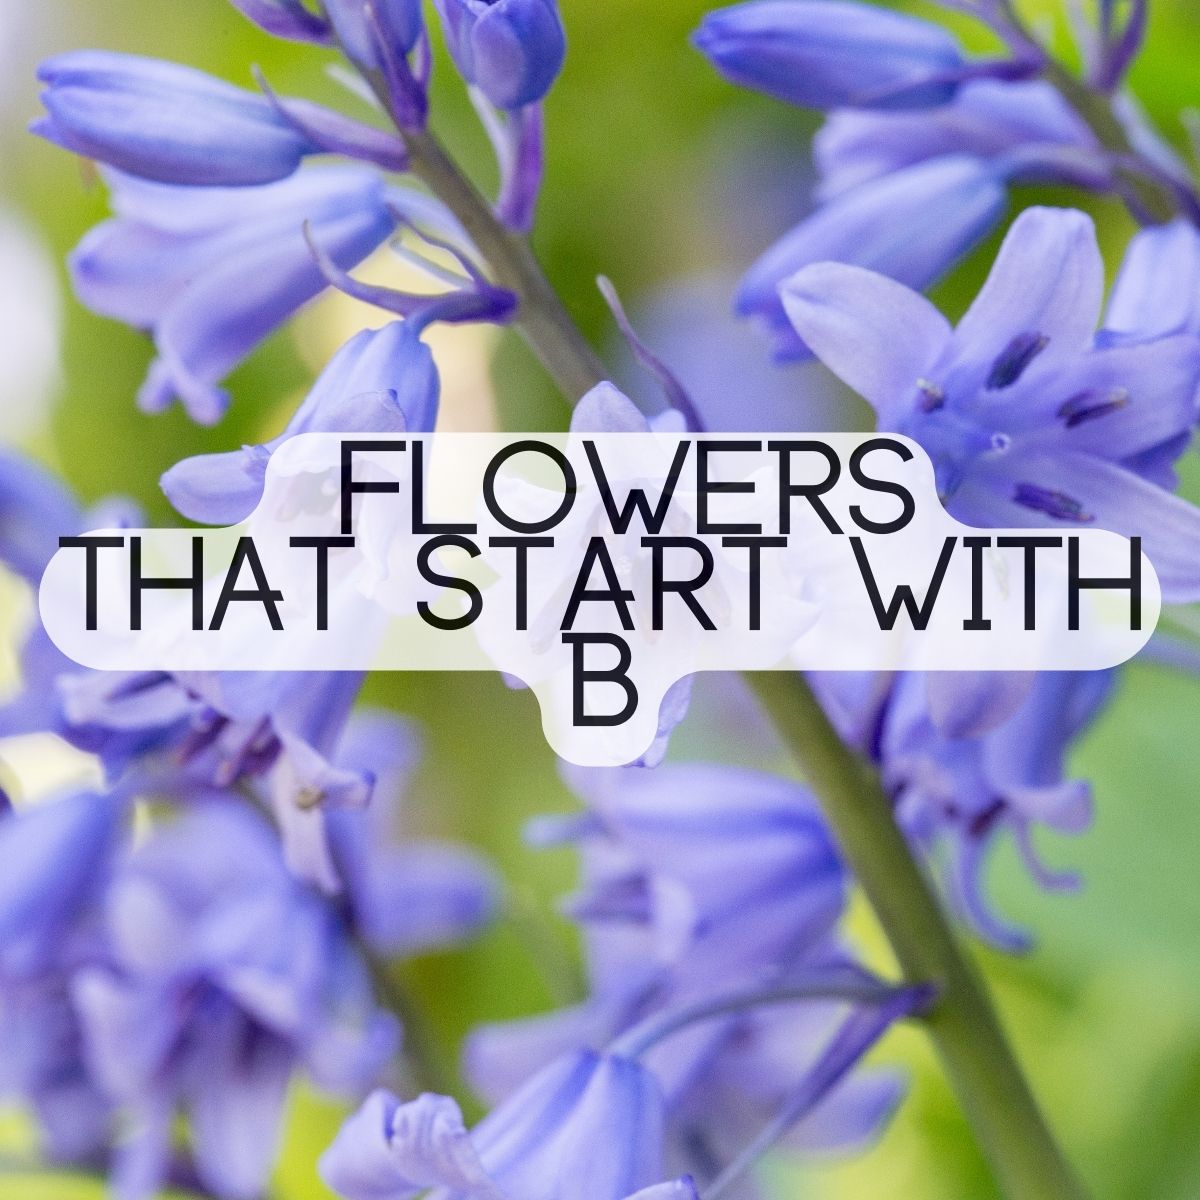 Flowers that start with B.